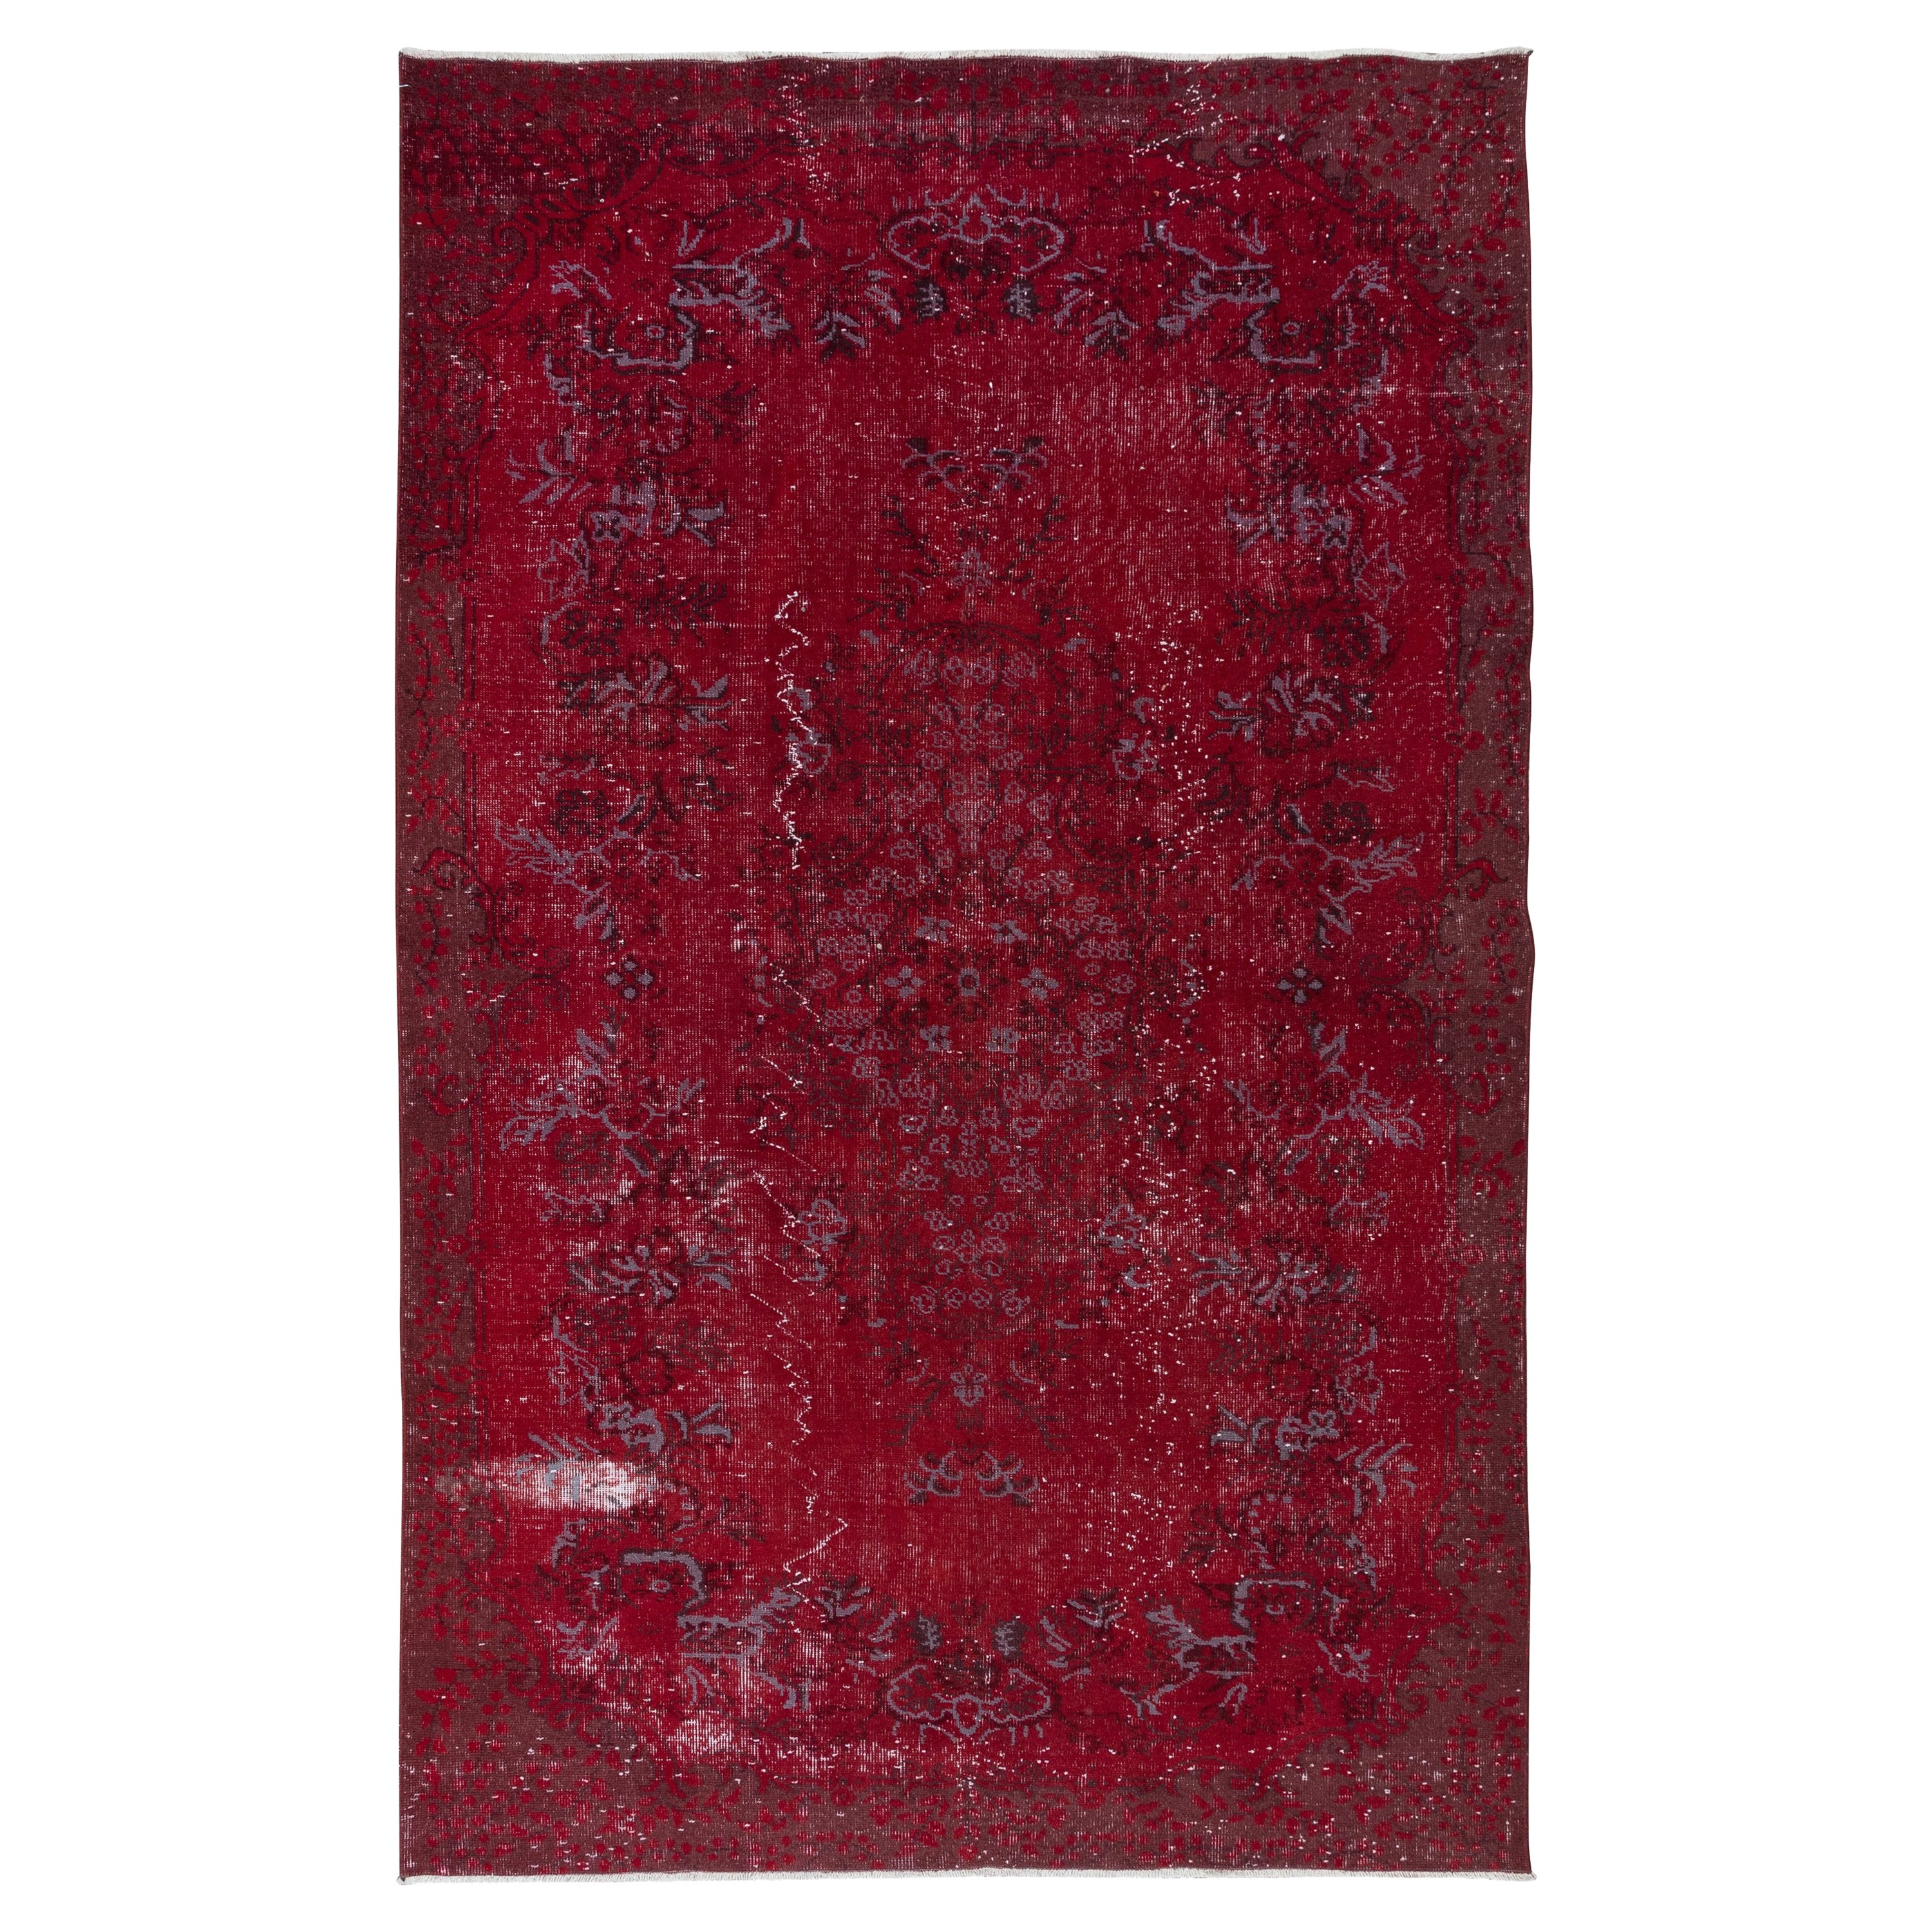 5.8x9.4 Ft Handknotted Turkish Rug in Dark Red, Ideal for Contemporary Interiors